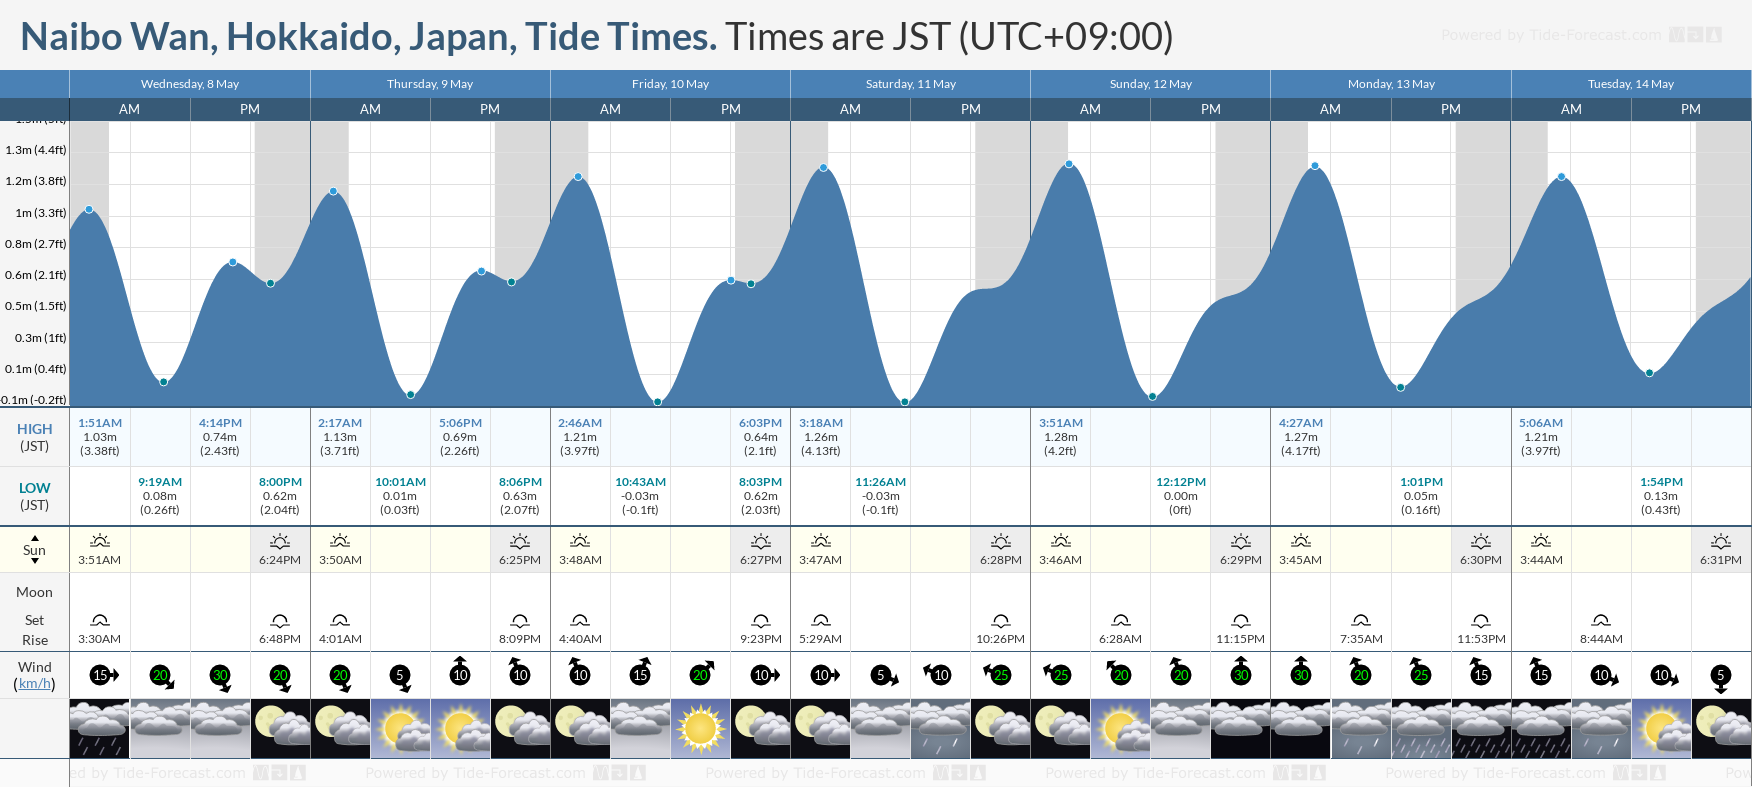 Naibo Wan, Hokkaido, Japan Tide Chart including high and low tide times for the next 7 days